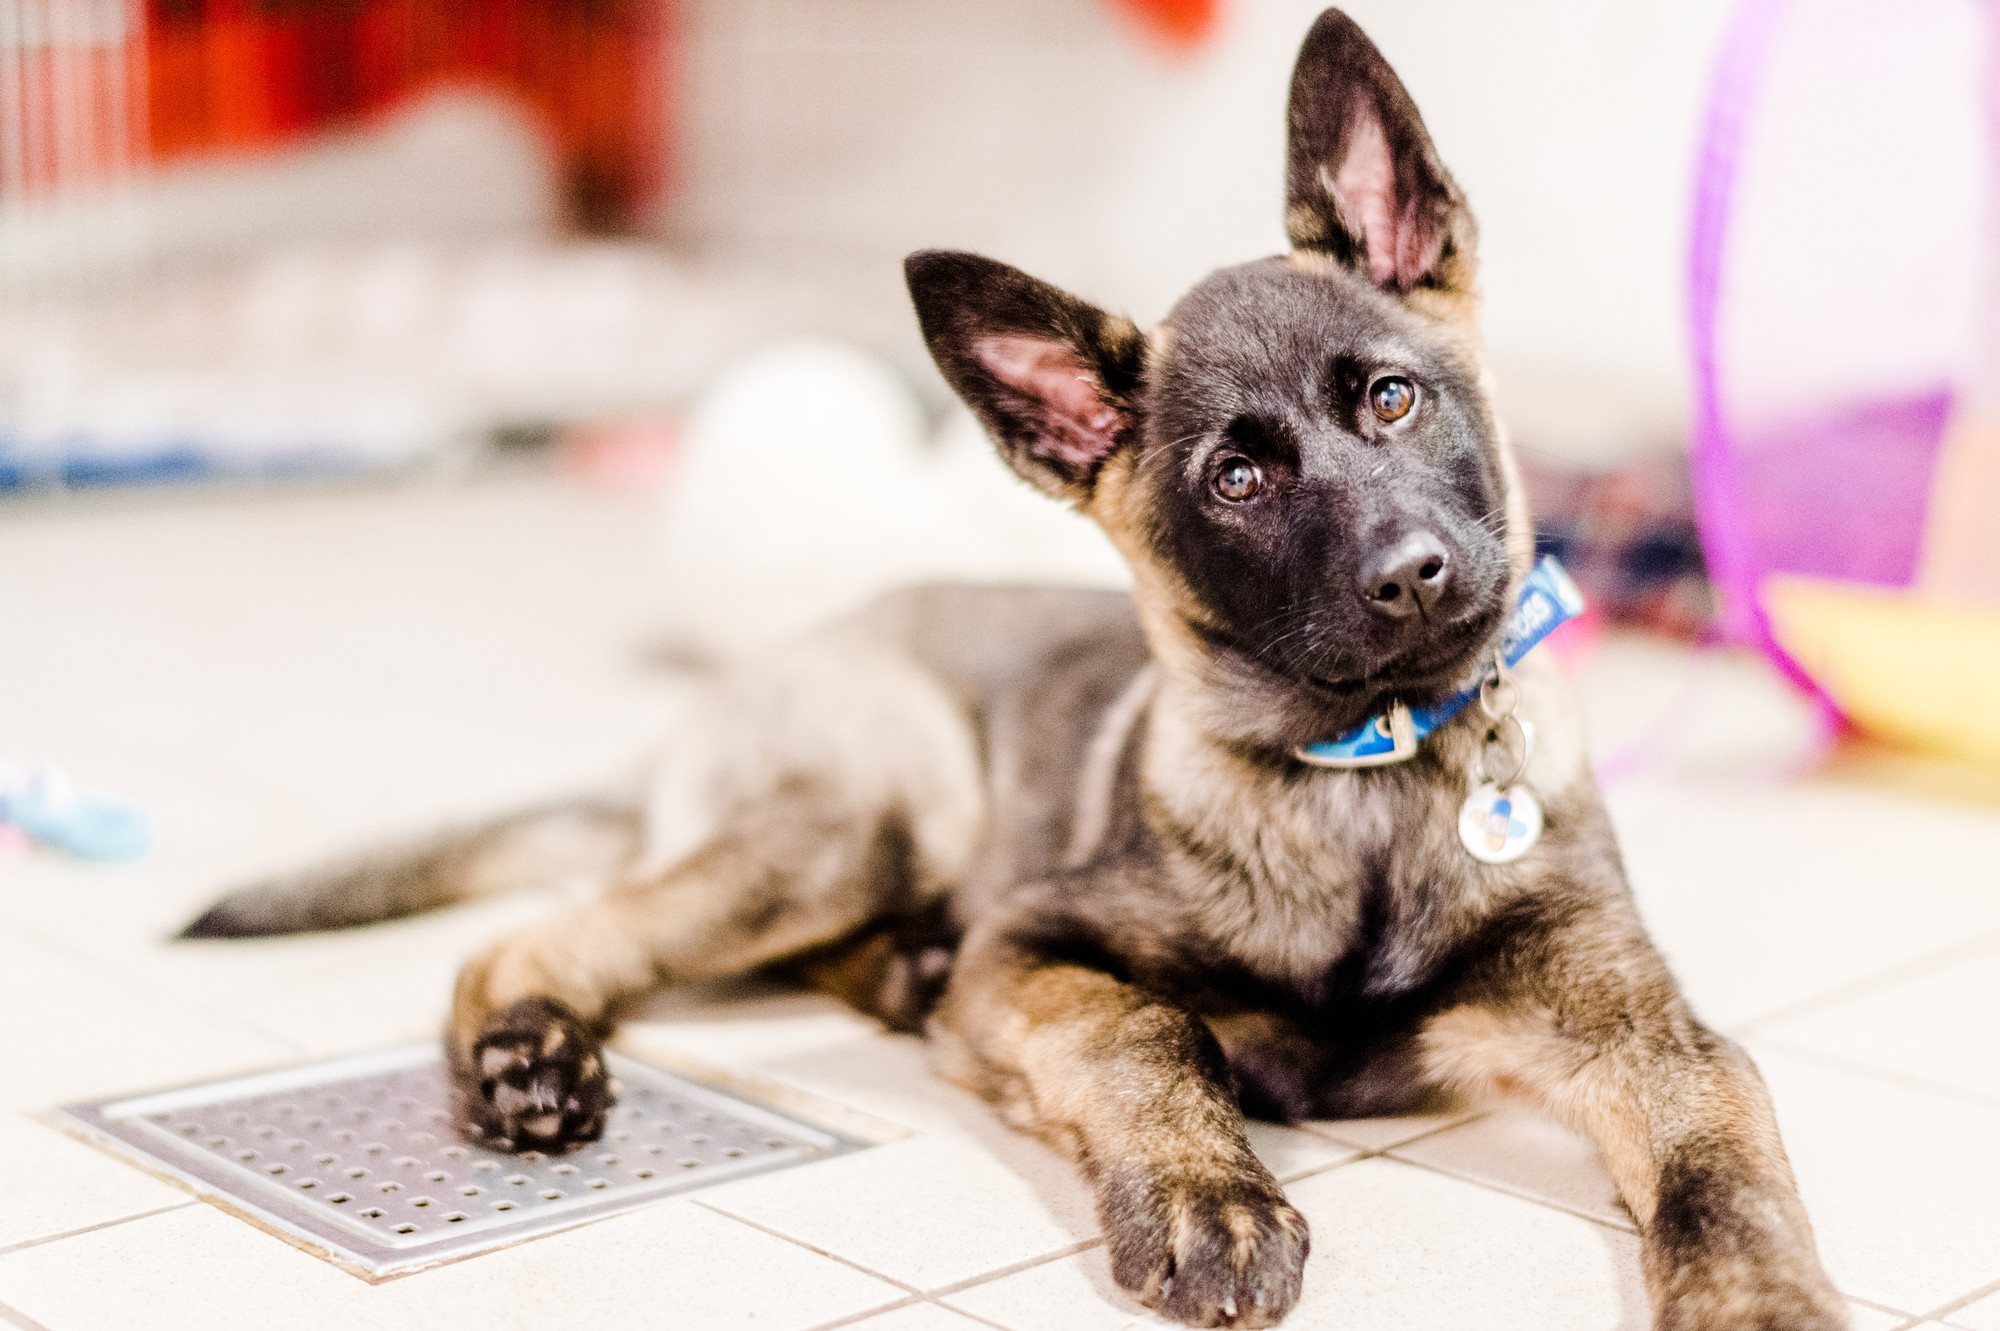 Suzie, the Belgian shepherd puppy, looks at the camera with her head tilted